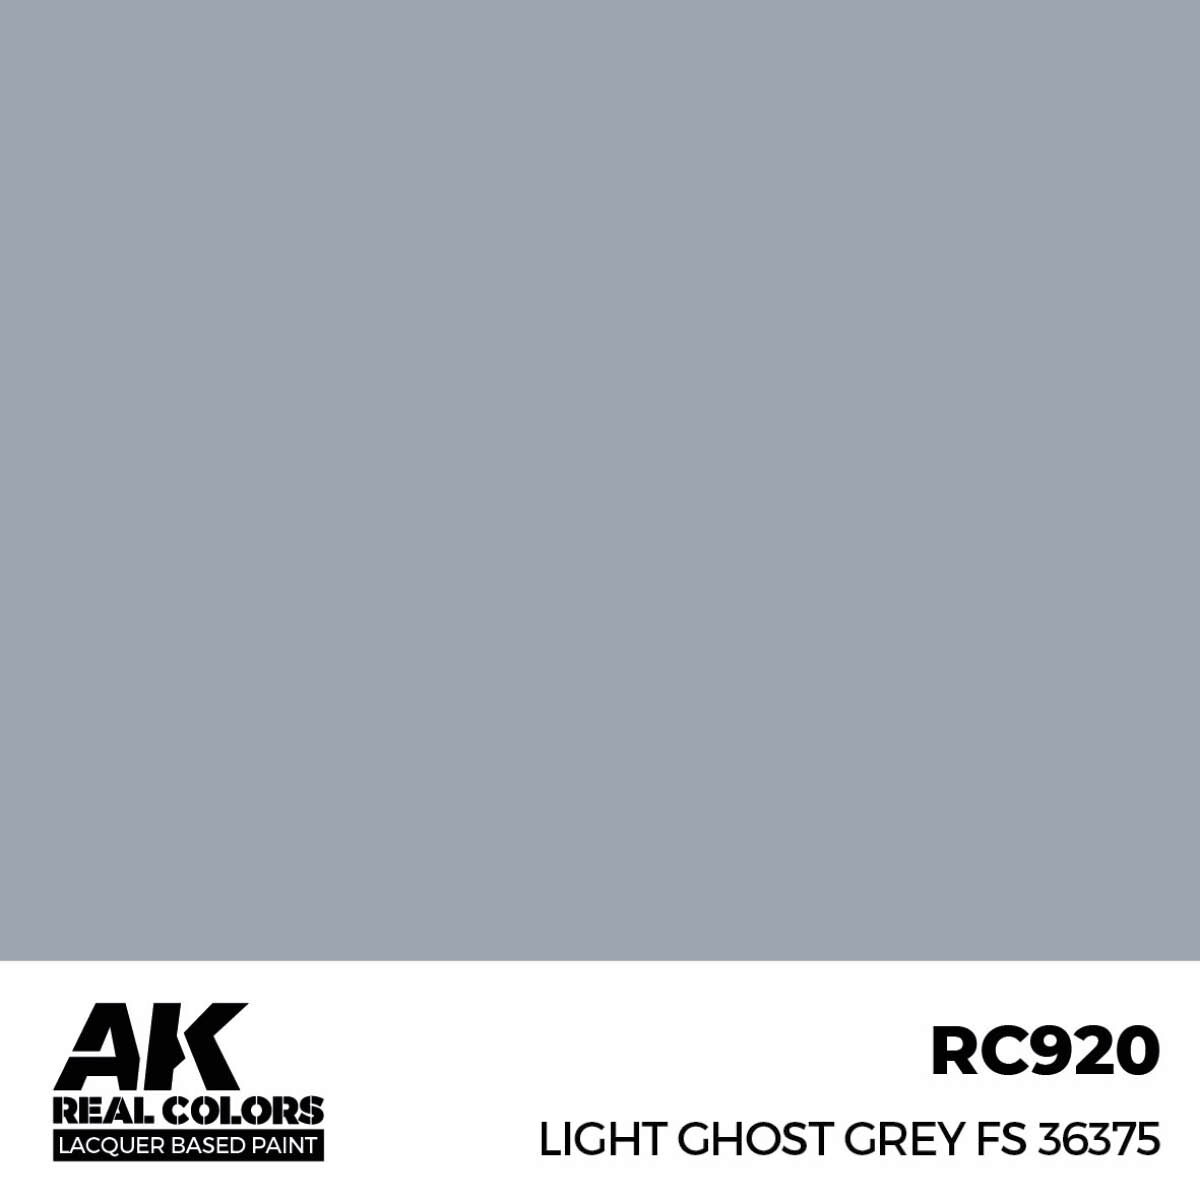 AK RC920 Real Colors Light Ghost Grey FS 36375 17 ml.